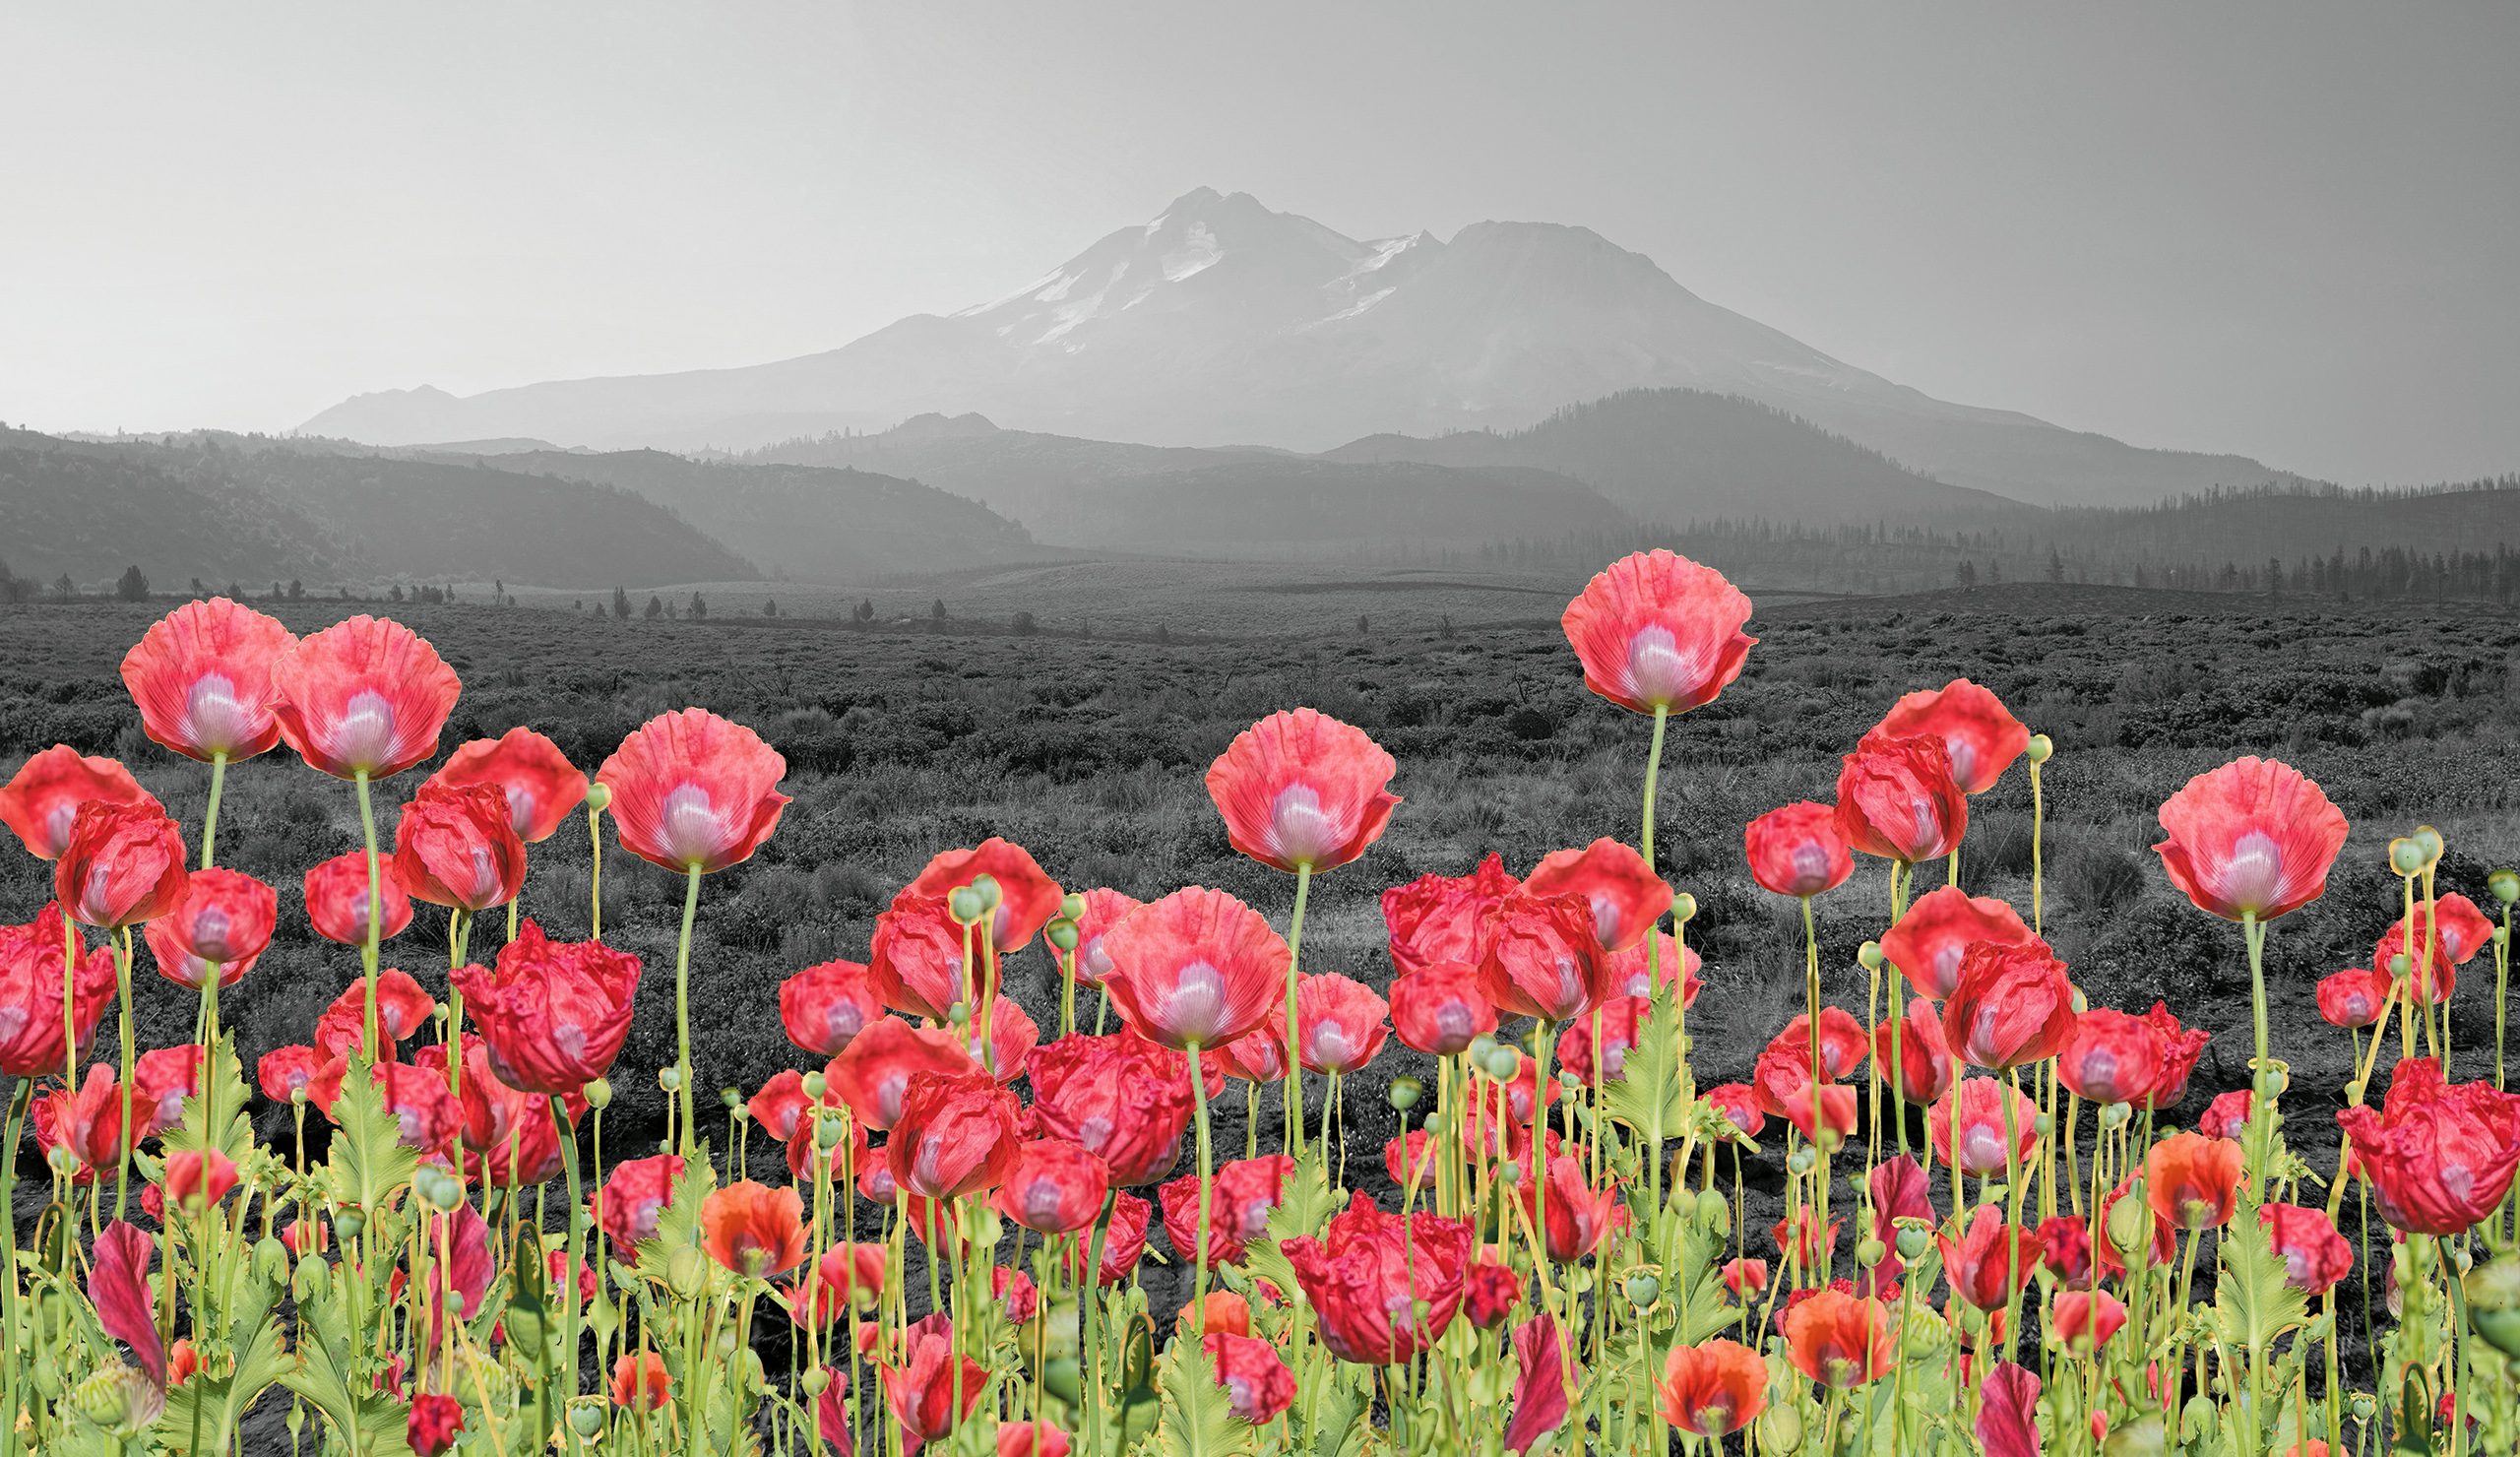 composite photo of colorful poppies in the foreground and a black & white mountain landscape in the background